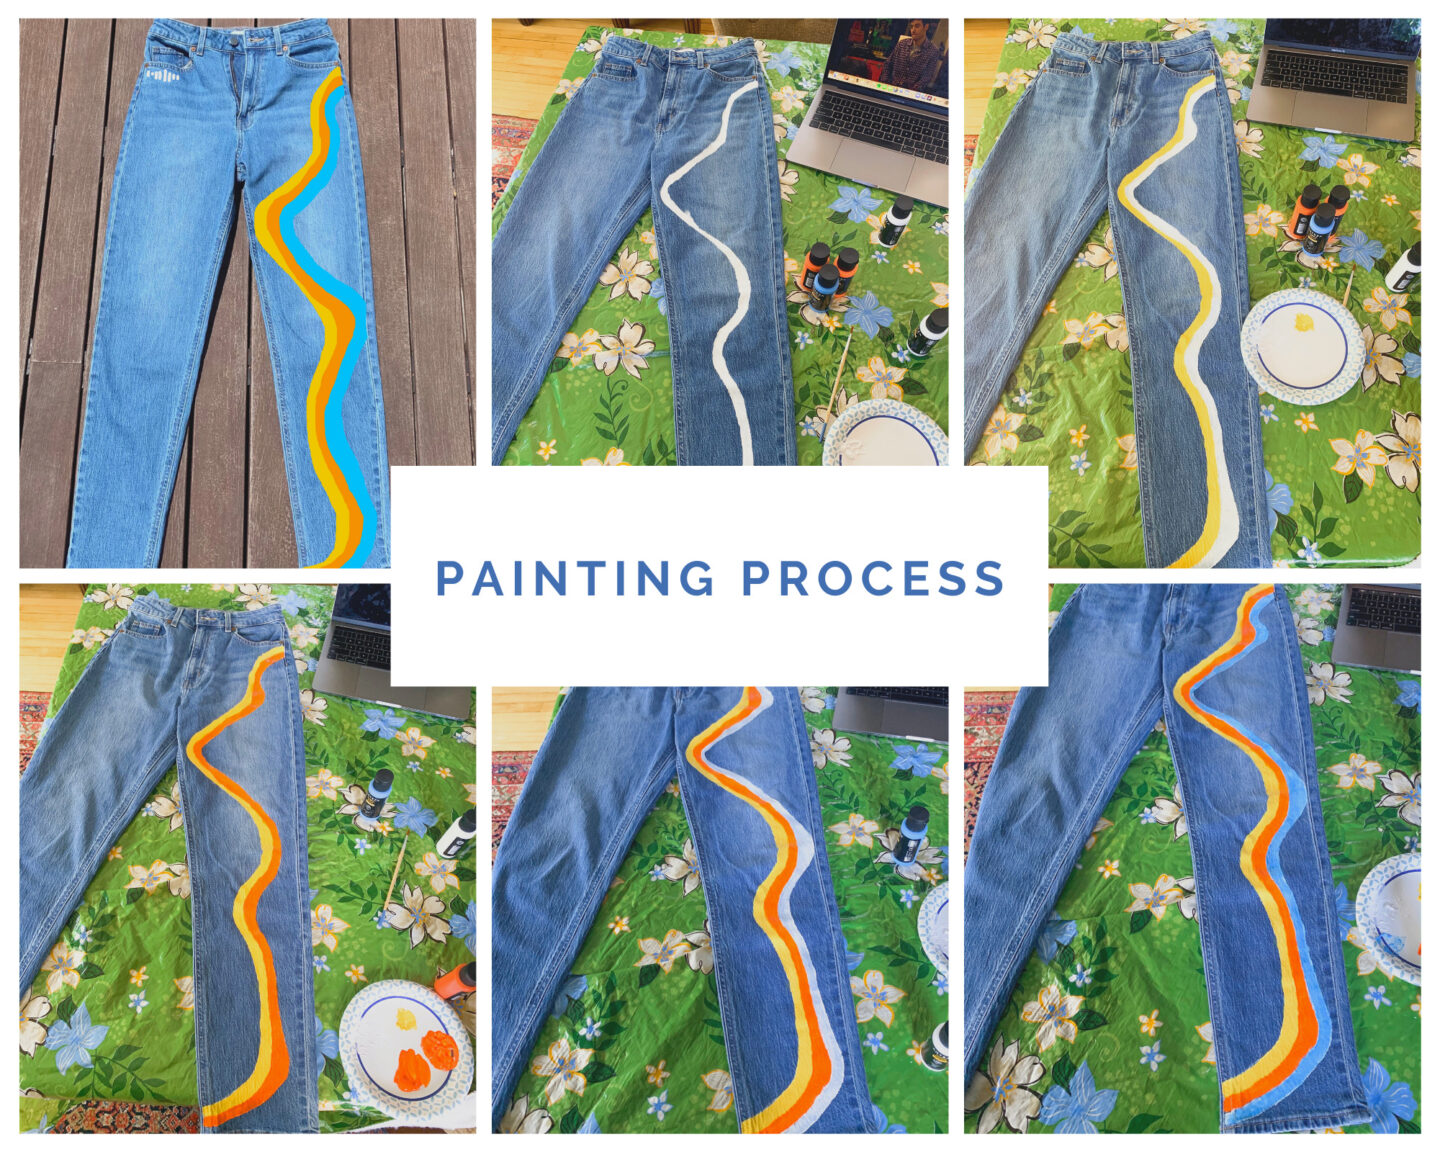 How to Paint Denim Jeans and Jackets (Best Paint, Supplies, and Tips)